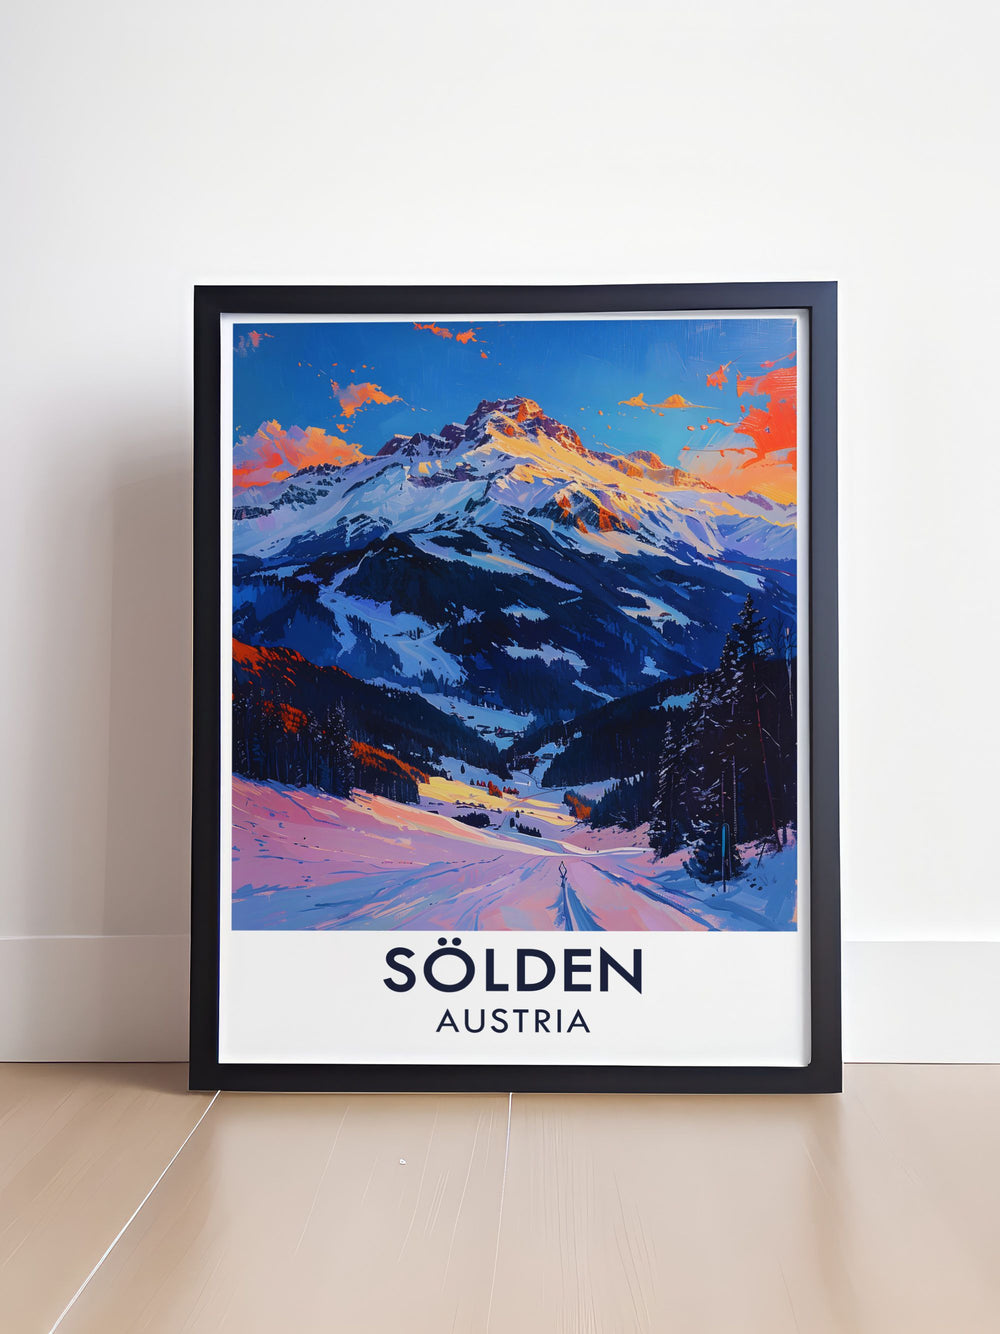 The stunning views from Gaislachkogl Peak and the dynamic slopes of Solden Ski Resort are depicted in this travel poster, showcasing the natural beauty and thrilling experiences that make Solden a top destination.